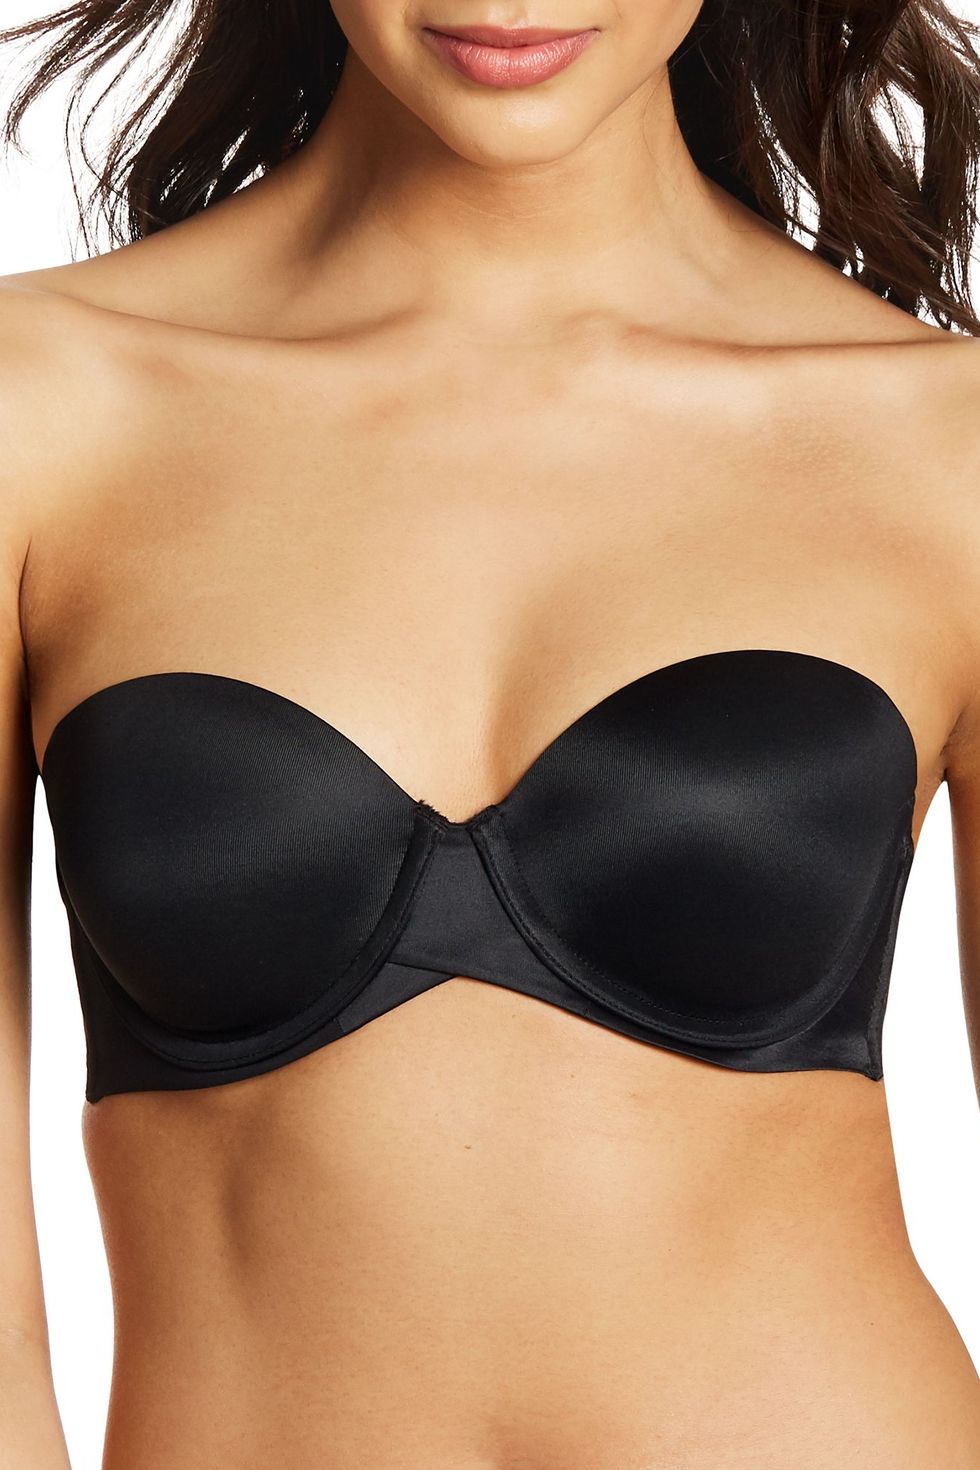 Can your strapless bra do this?! 😱 Check out this amazing before